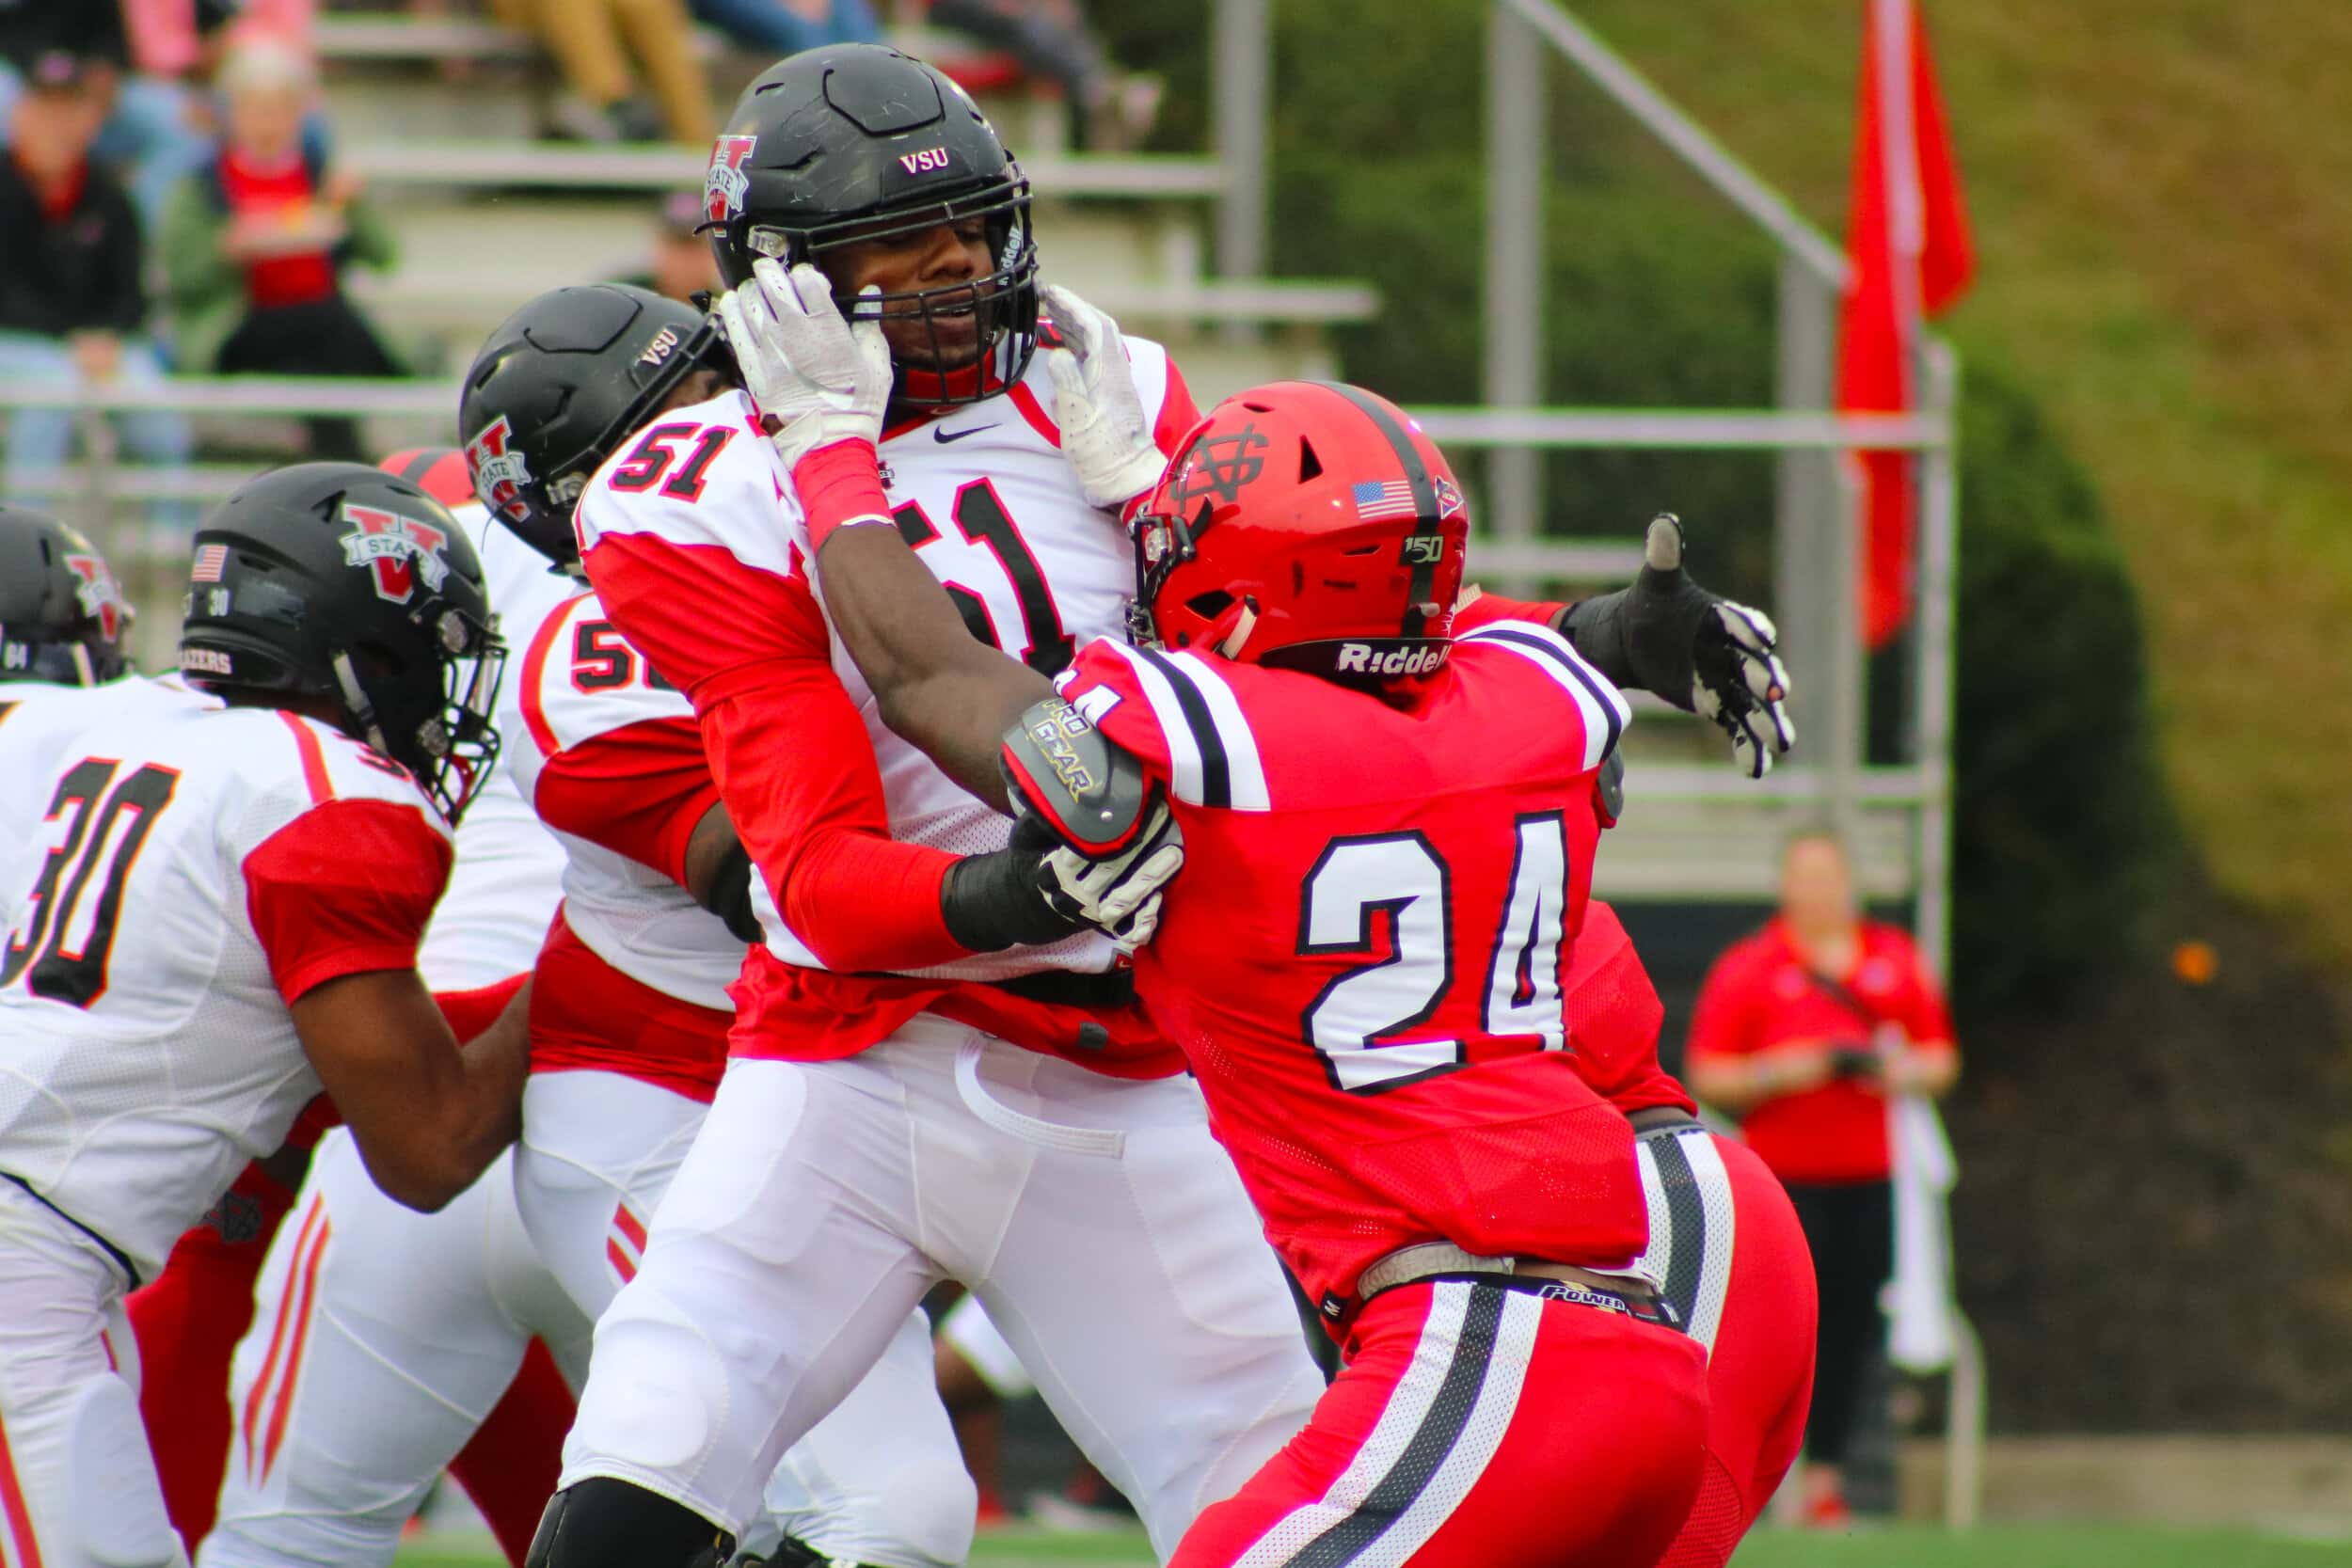 Freshman Micah Bryant (24) fights off a Blazer after the whistle was blown.